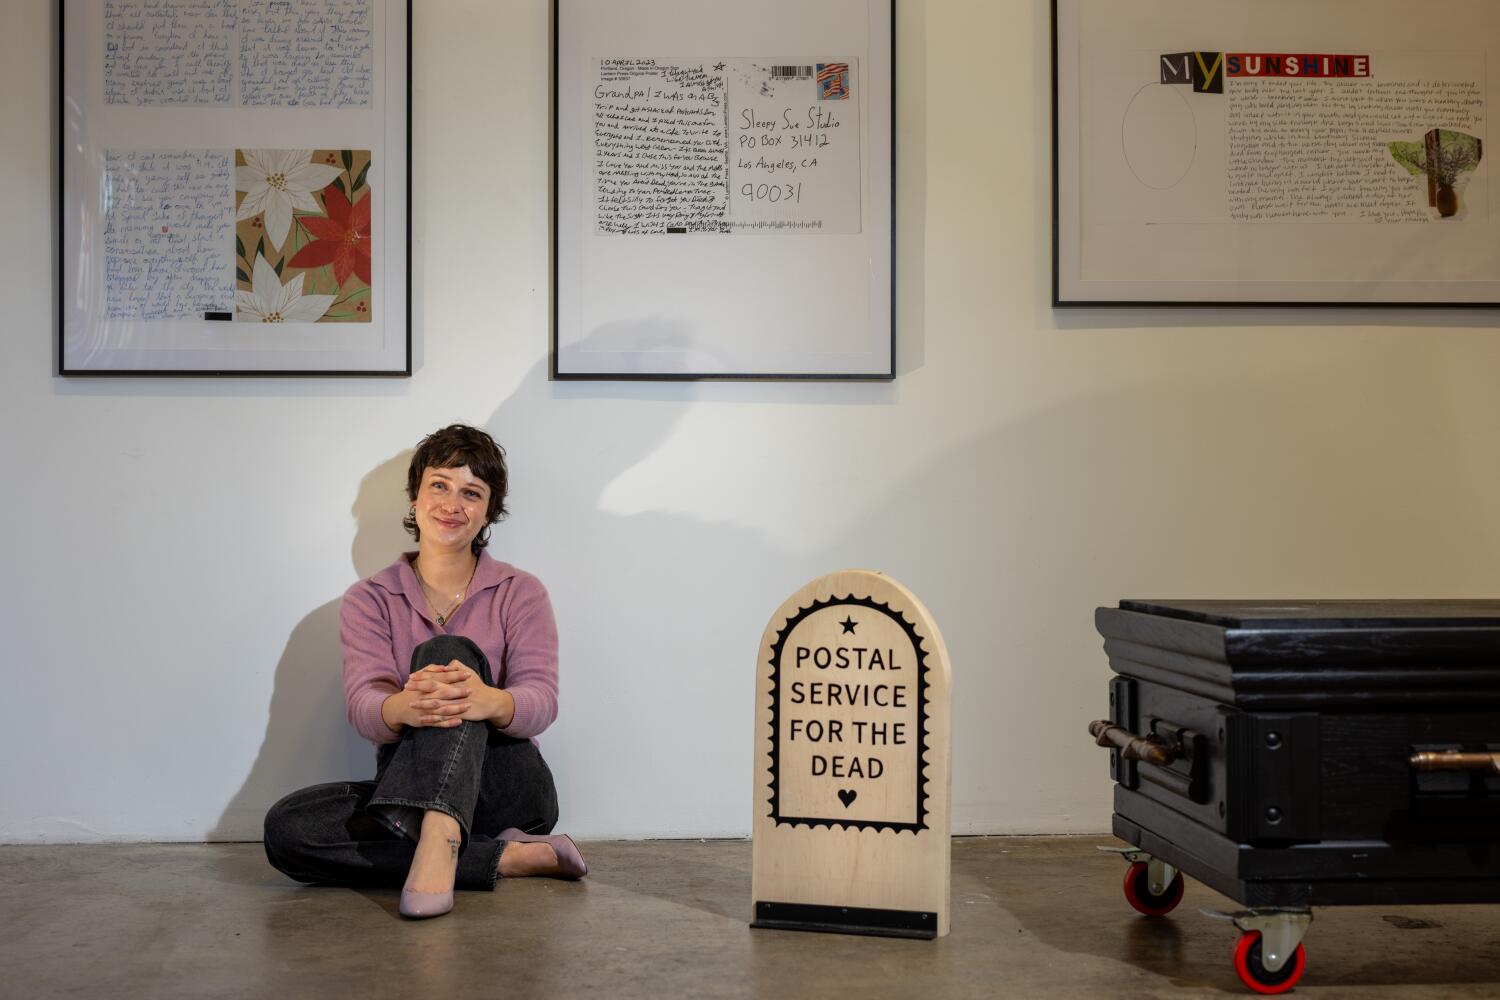 'You can continue a conversation': Letters to the dead arrive at this P.O. box in L.A.